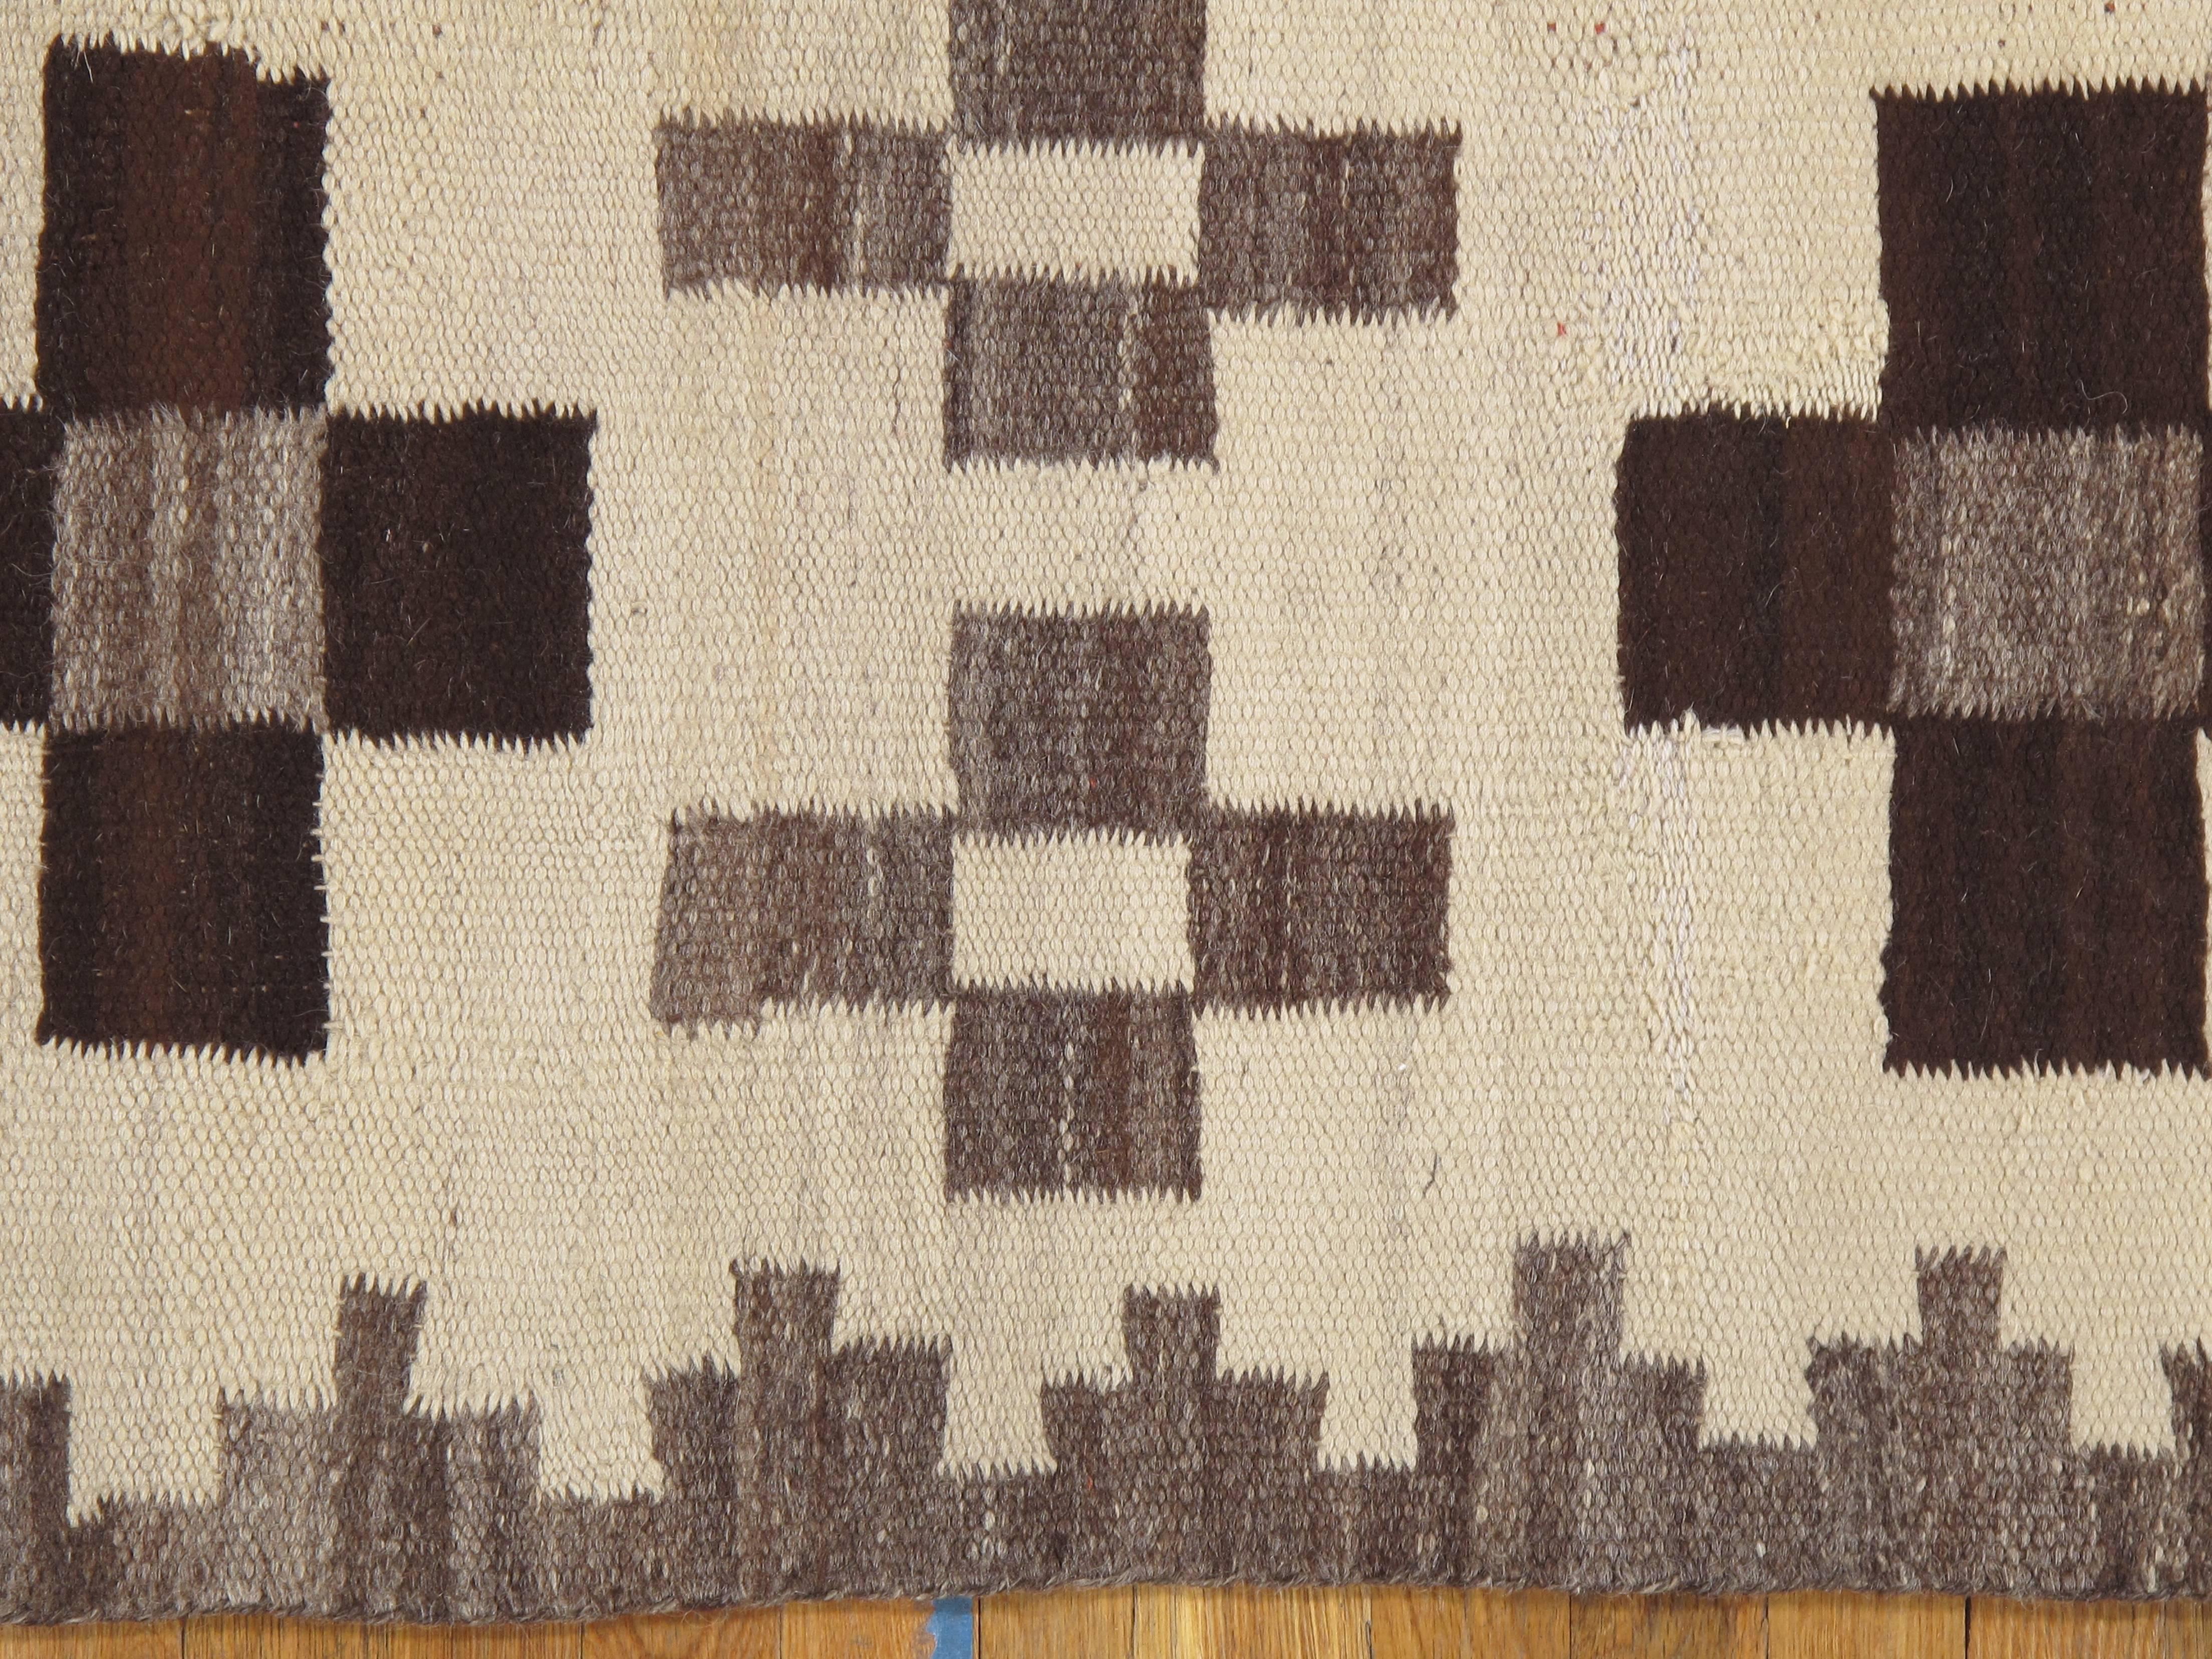 Navajo rugs and blankets are textiles produced by Navajo people of the Four Corners area of the United States, 2'x3'9". Navajo textiles are highly regarded and have been sought after as trade items for over 150 years. These rugs and blankets